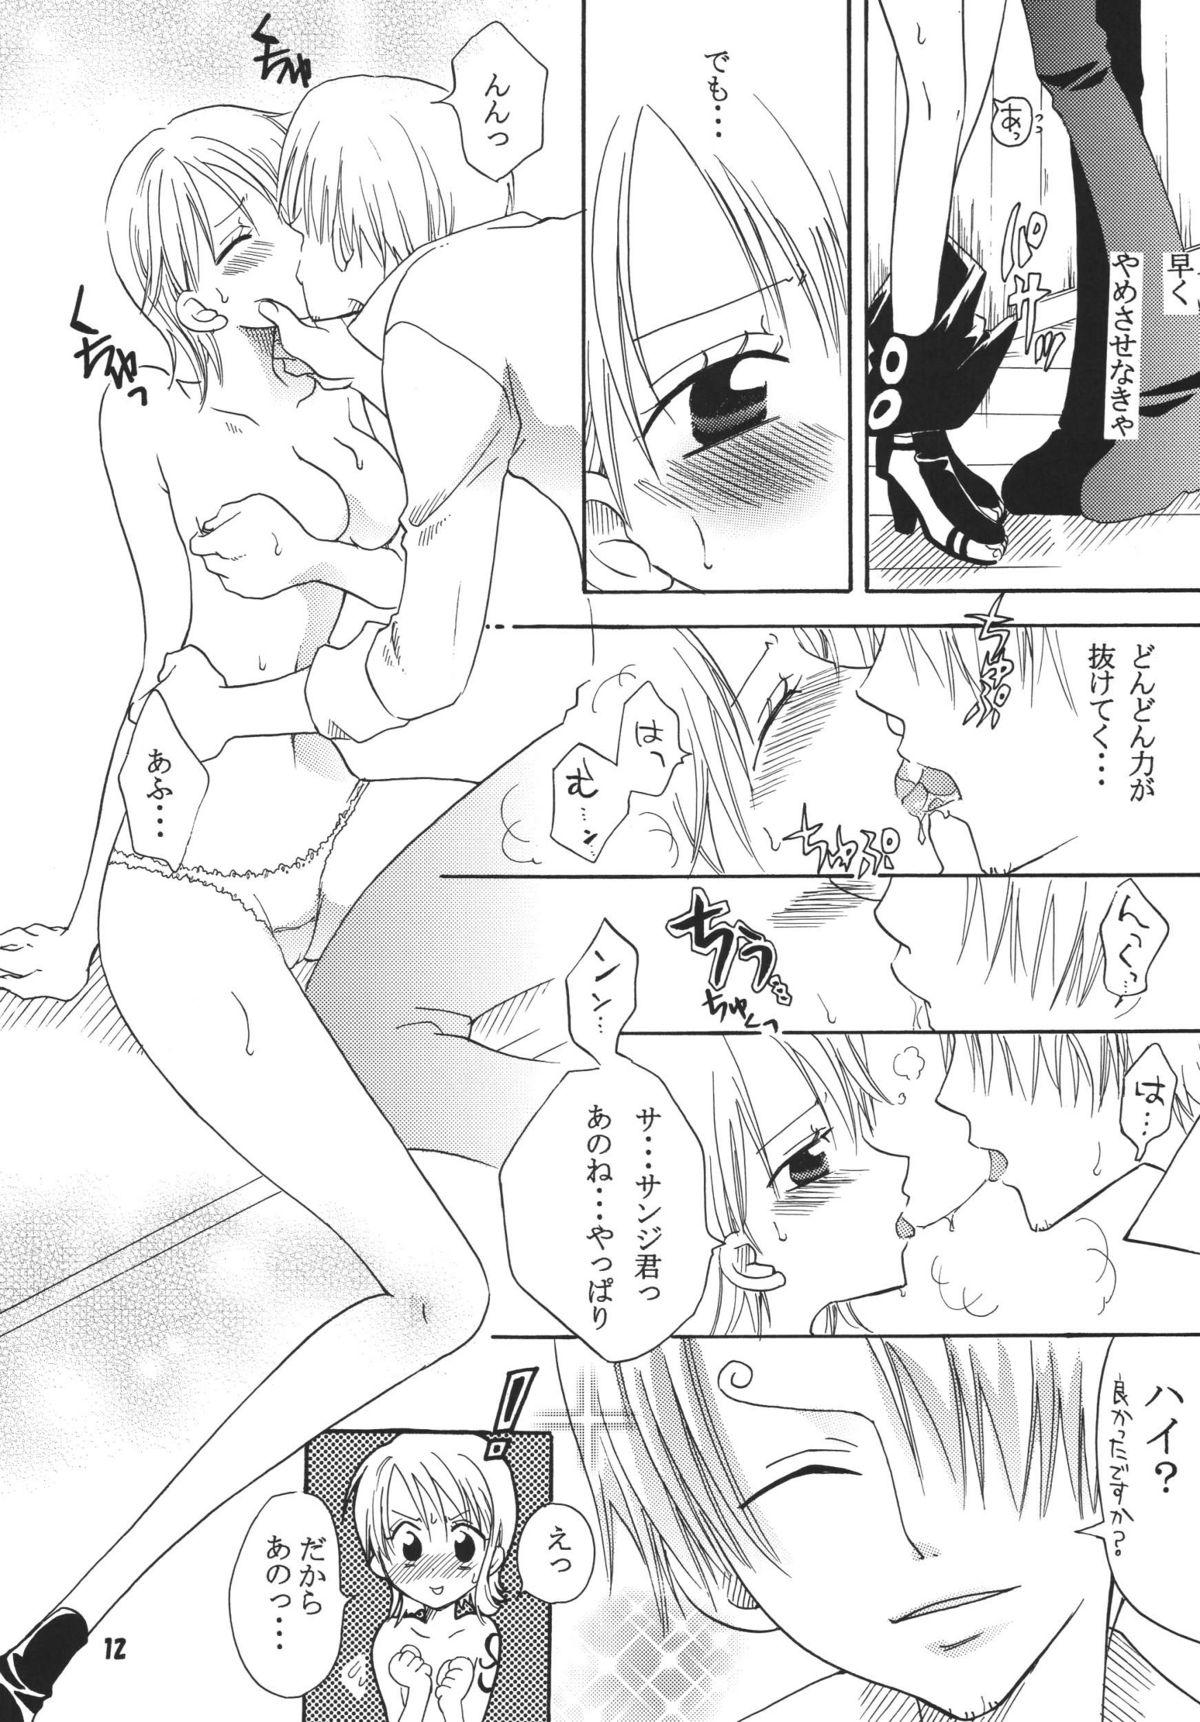 Pussylicking Kaizoku Musume. DX - One piece Blowjobs - Page 11